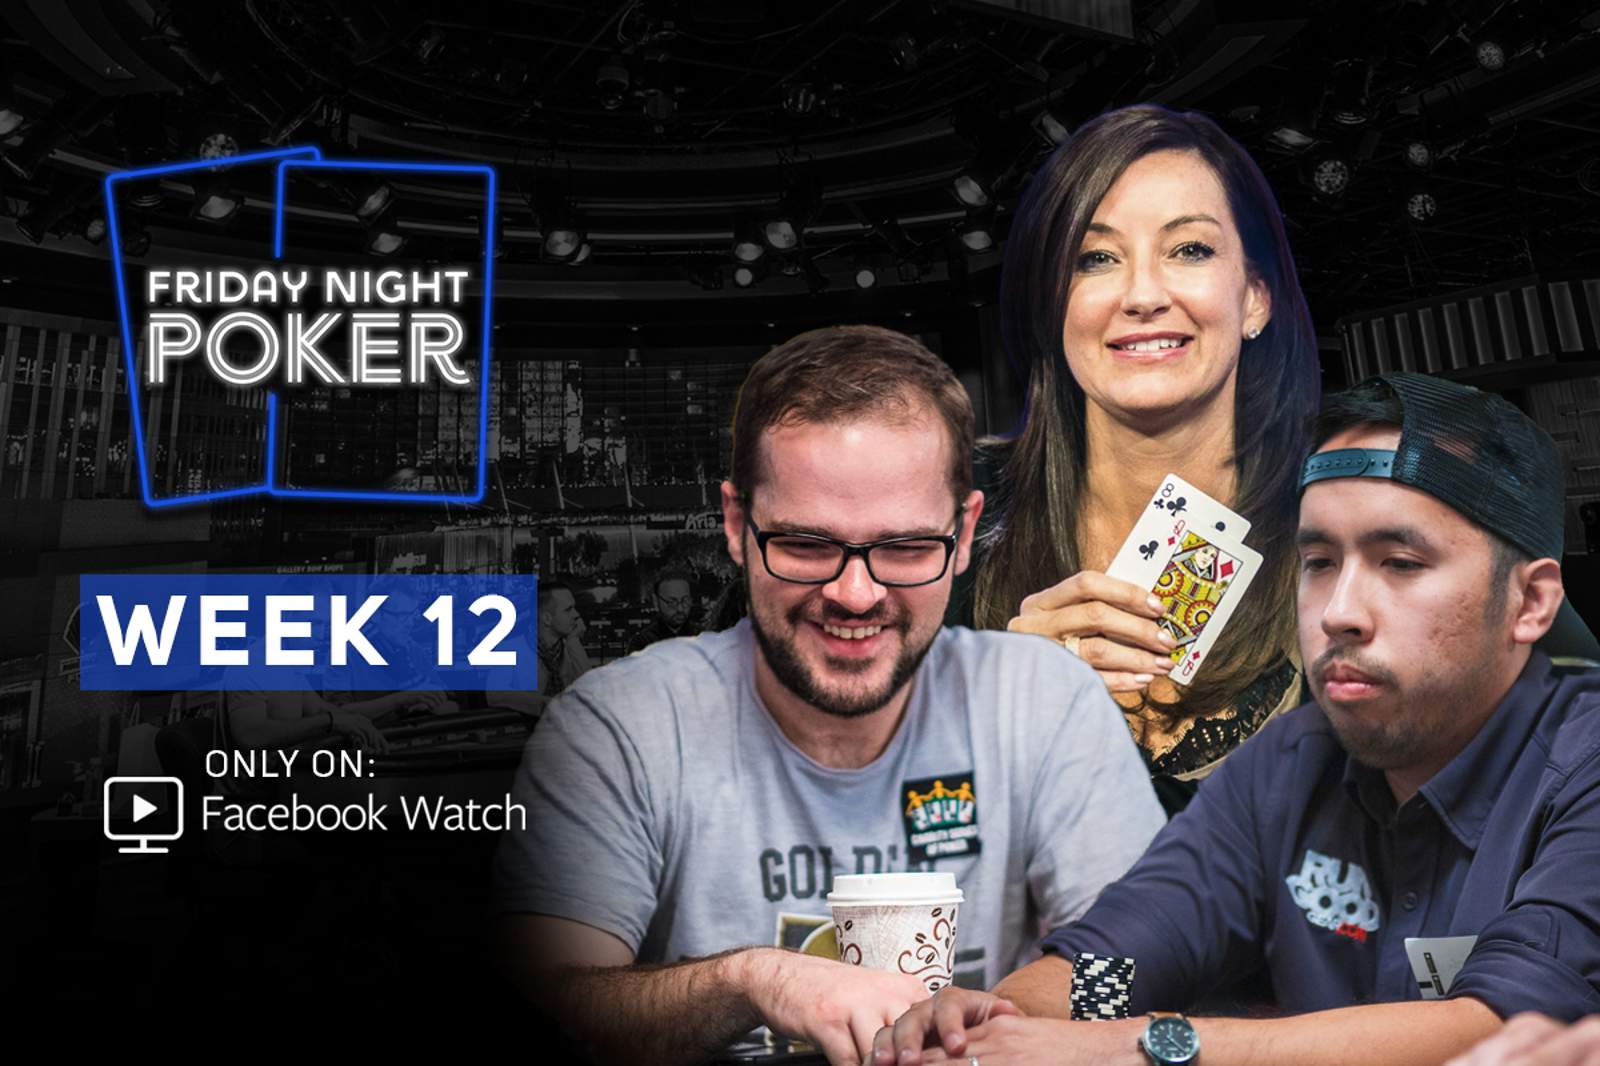 Charity and Friday Night Poker Come Together in Week 12!